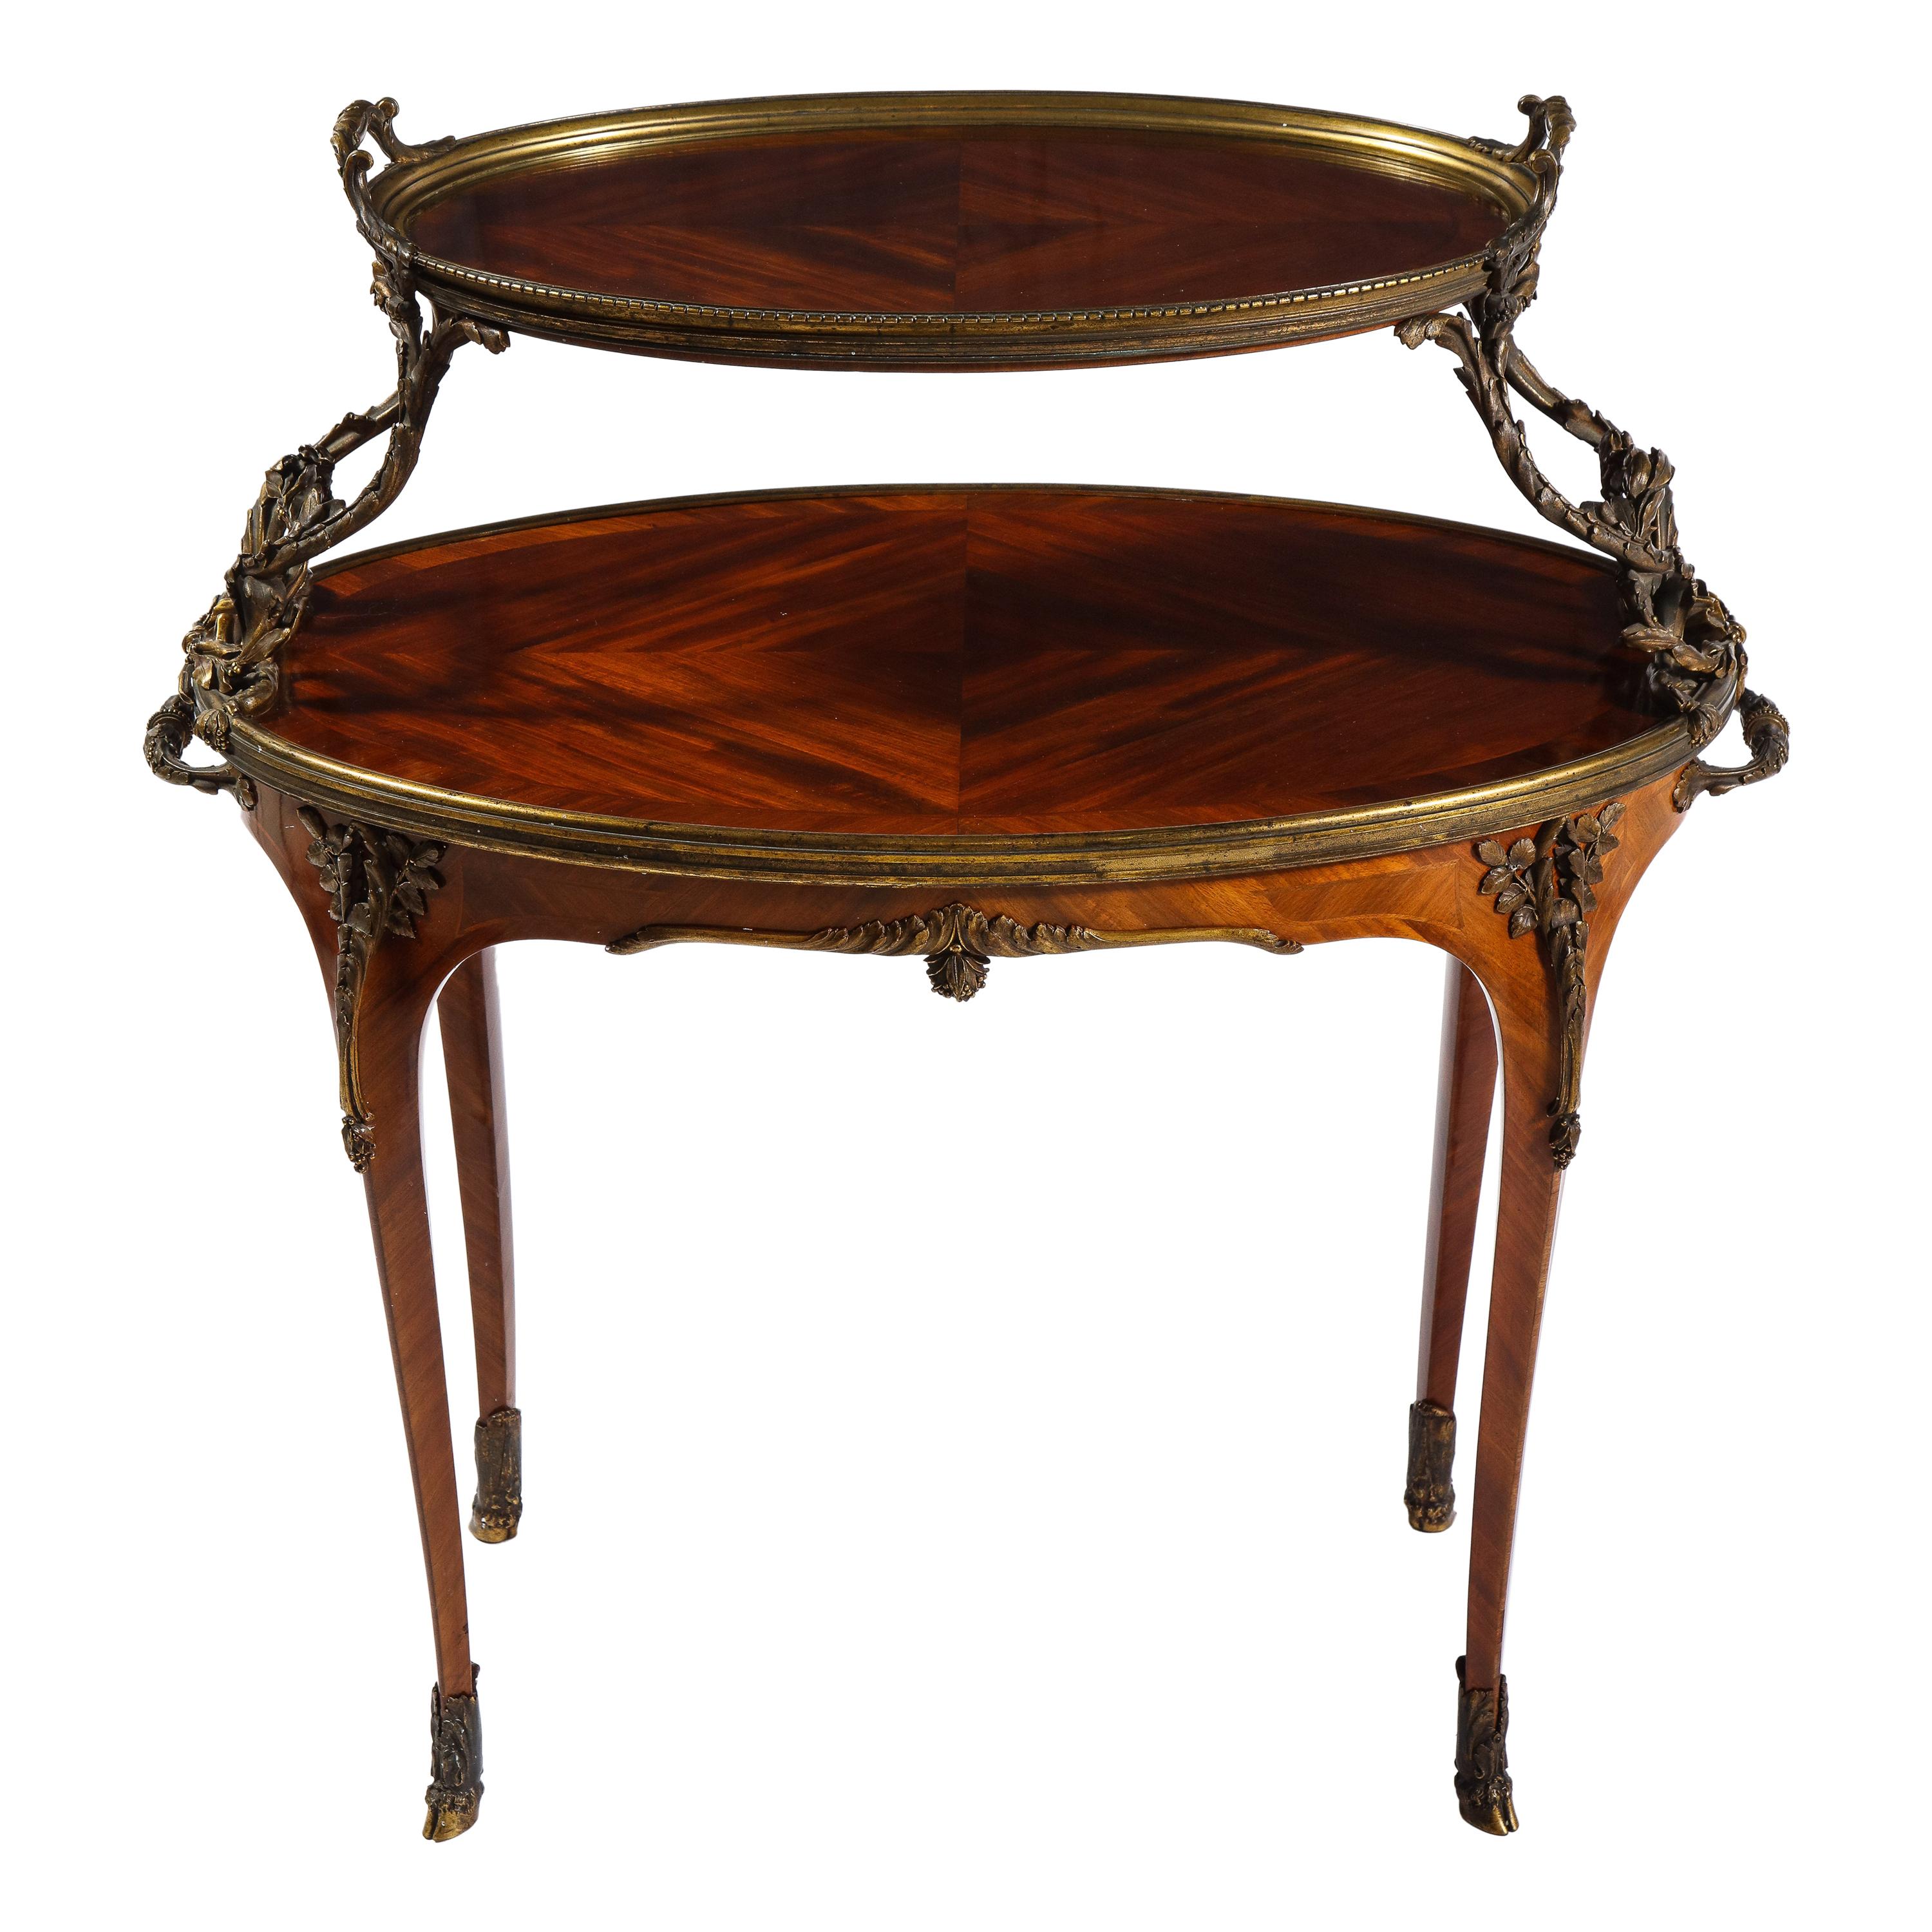 French Ormolu-Mounted Mahogany Two-Tier Tea Table, Attributed to Paul Sormani For Sale